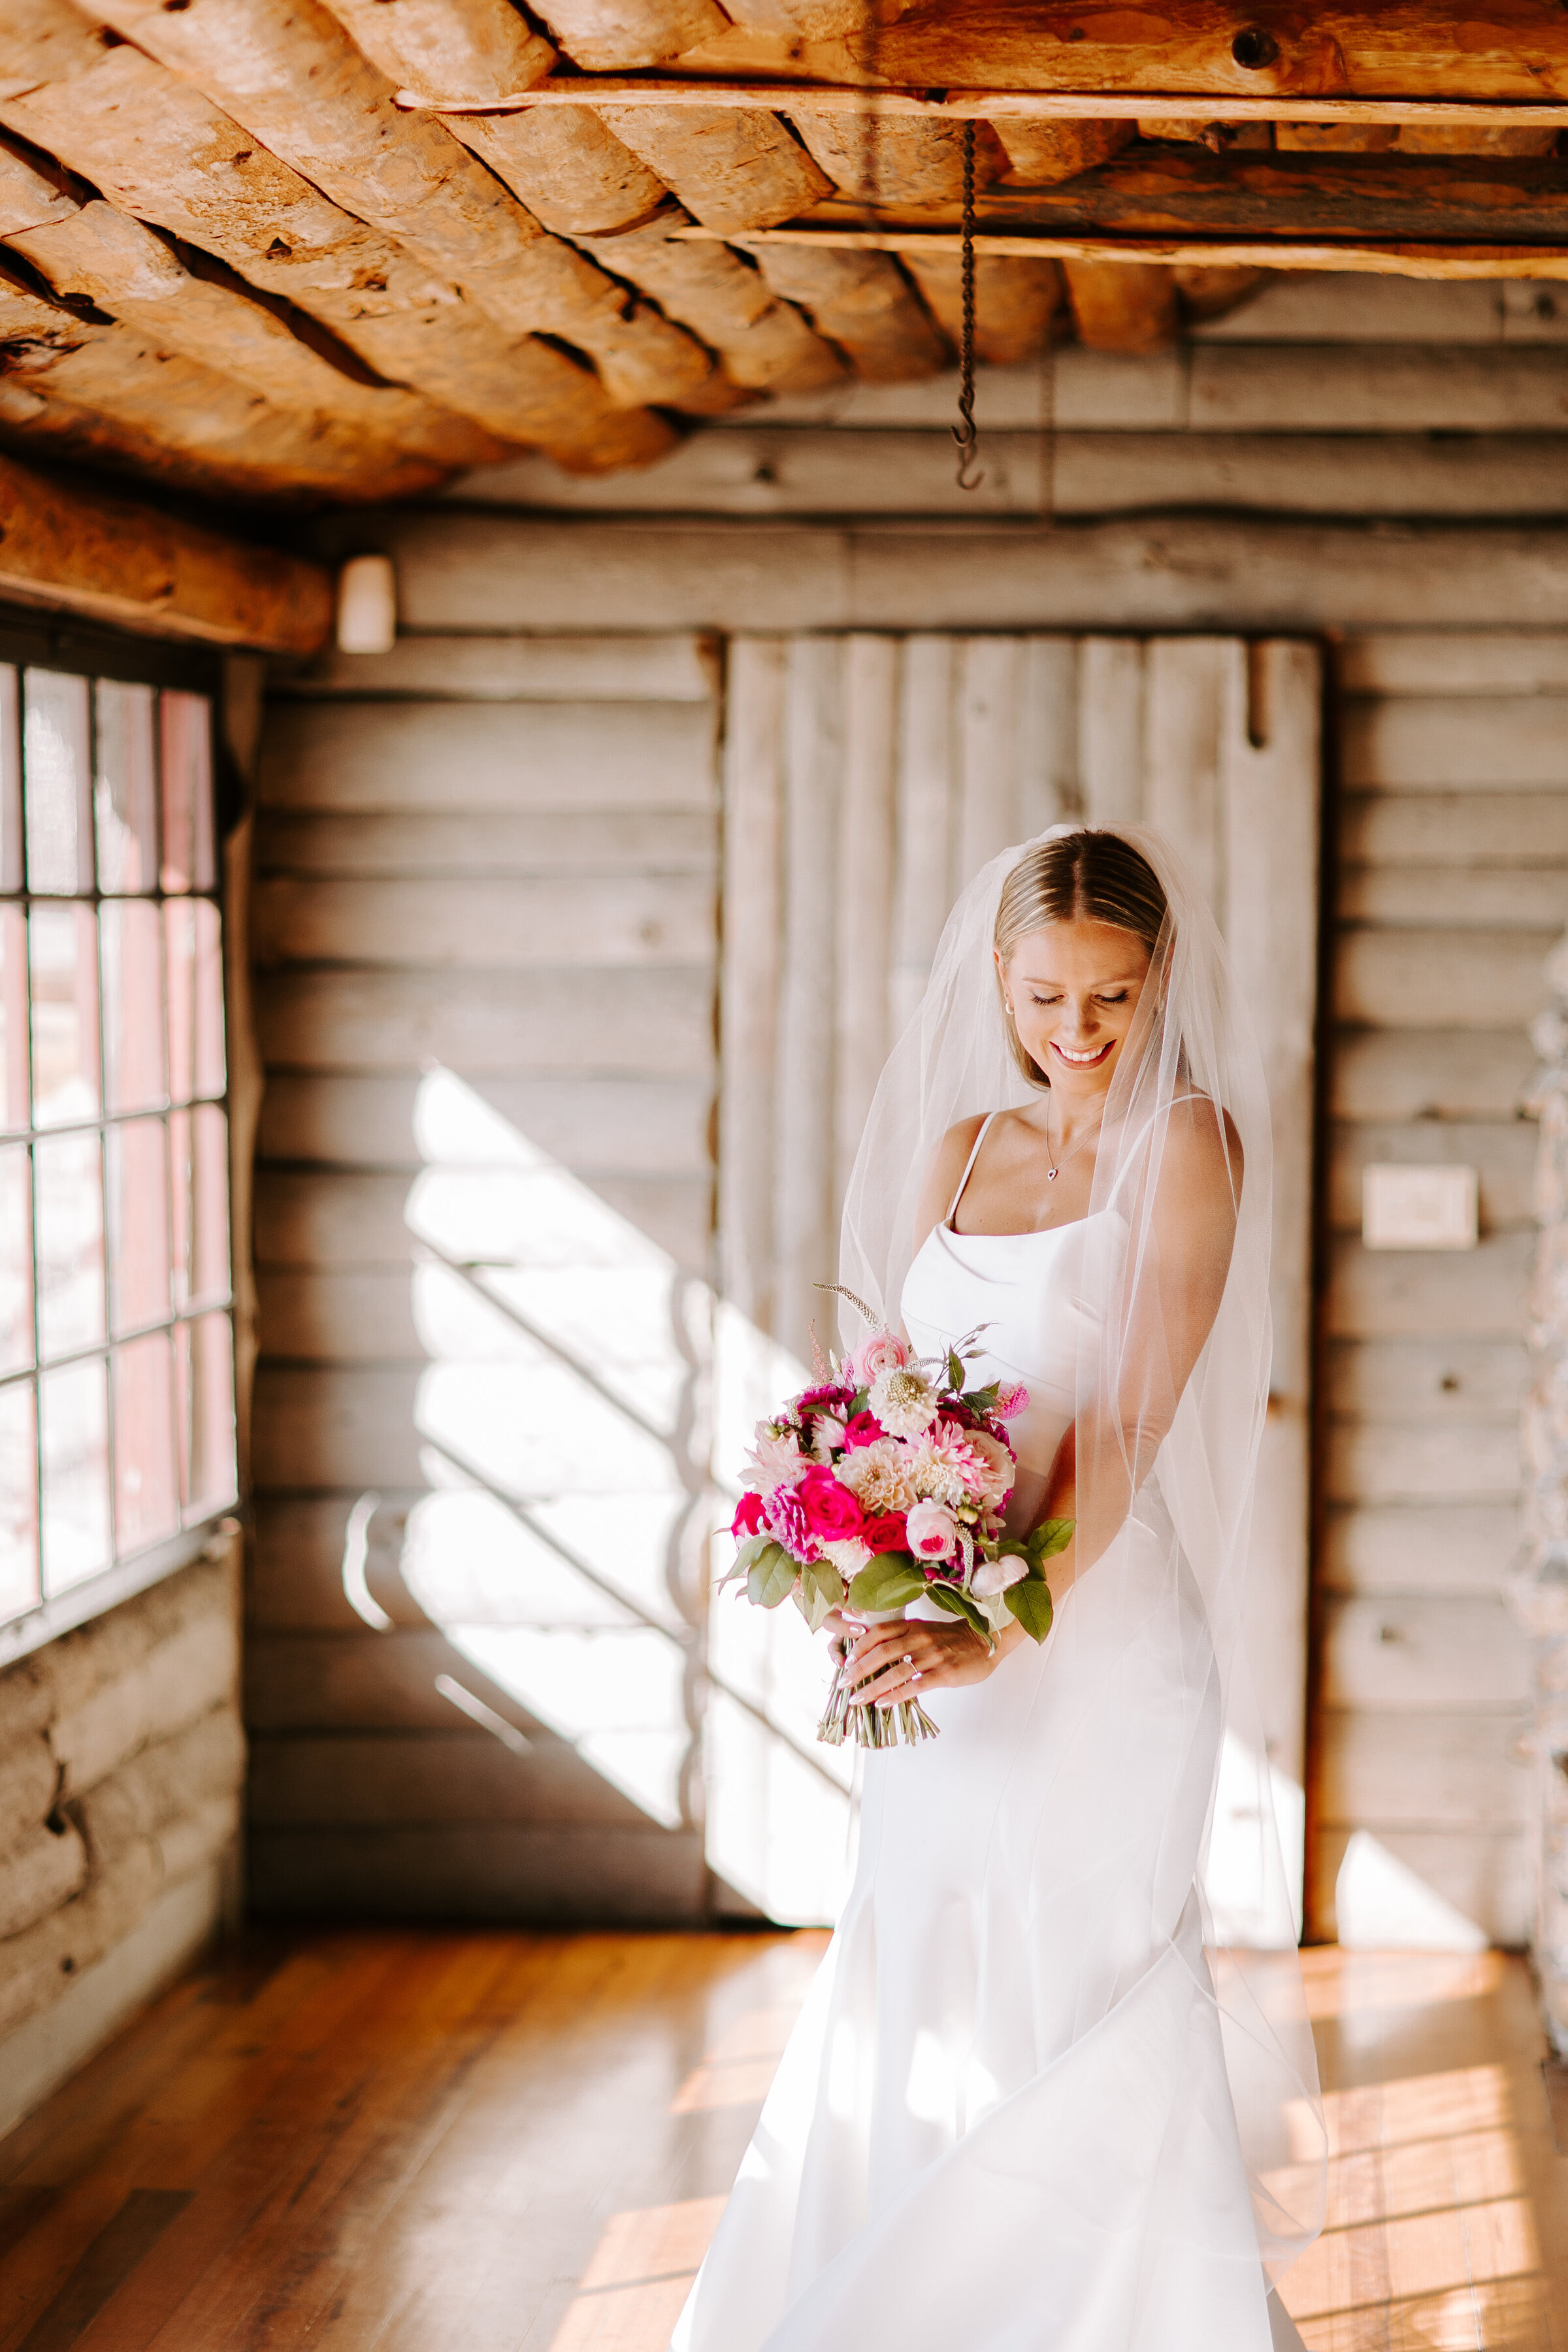 Bride looks down at her bouquet before wedding ceremony at mount hope farm in Bristol, RI